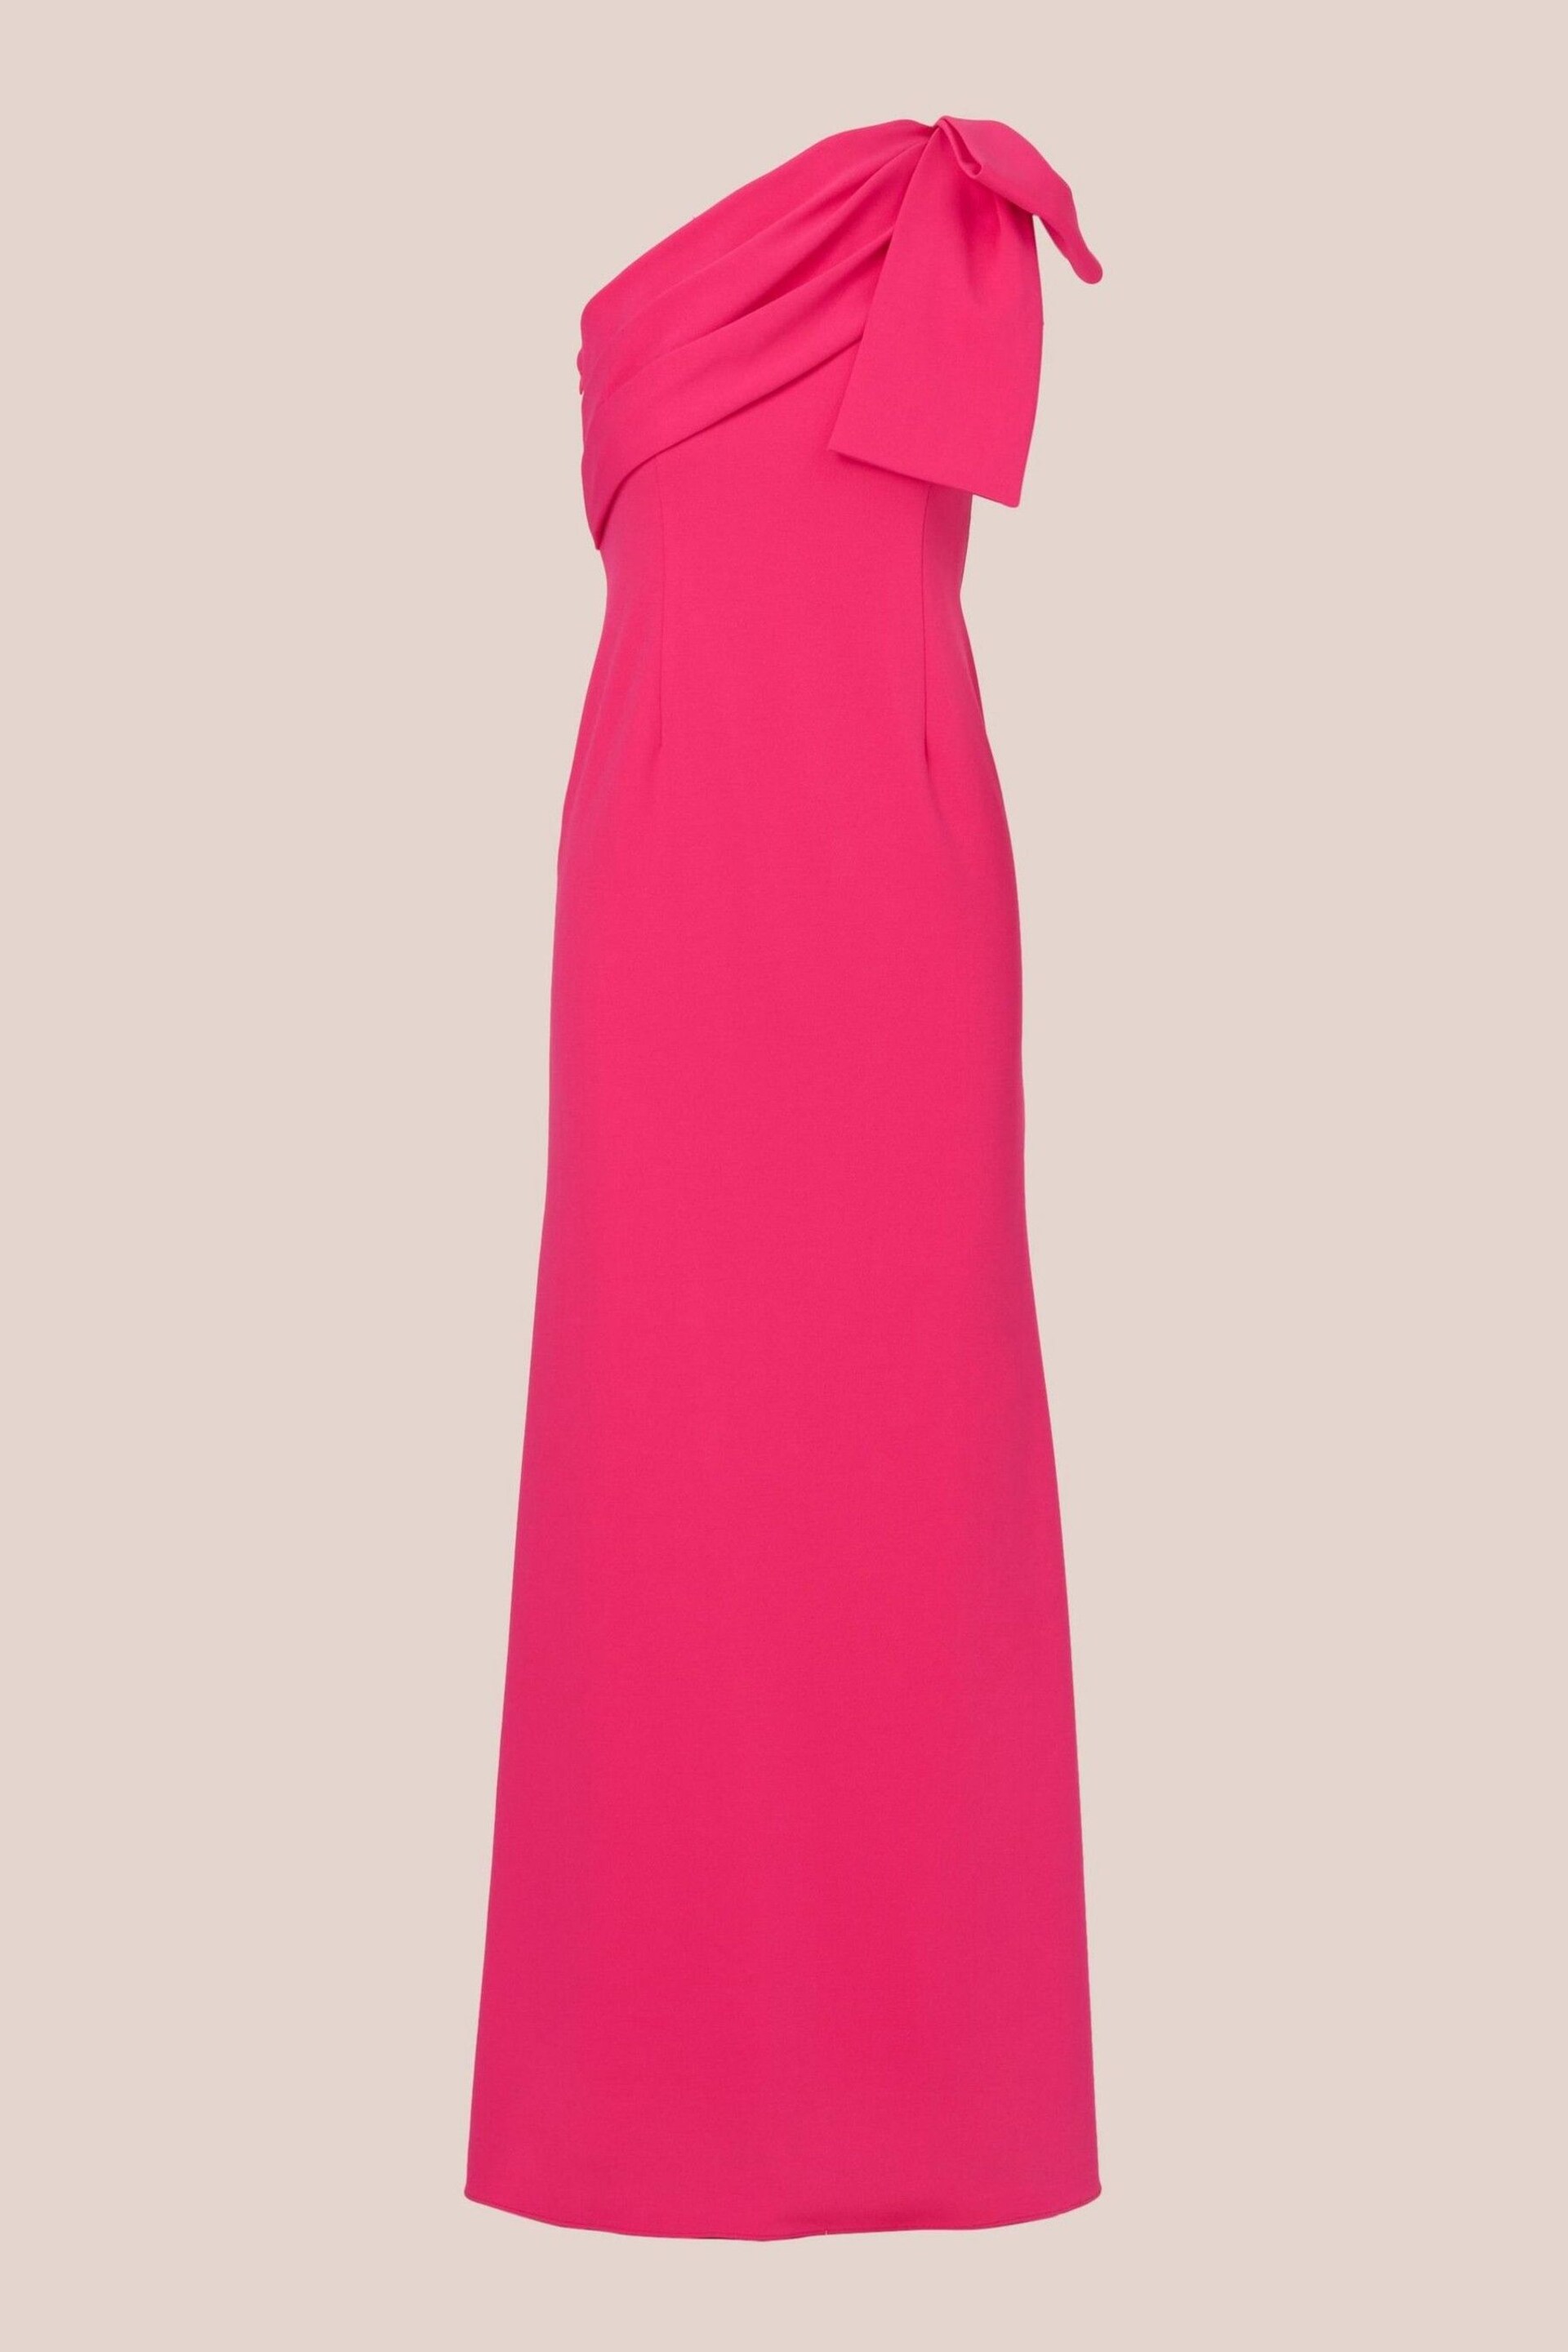 Adrianna Papell Pink Stretch Crepe Long Dress - Image 6 of 7